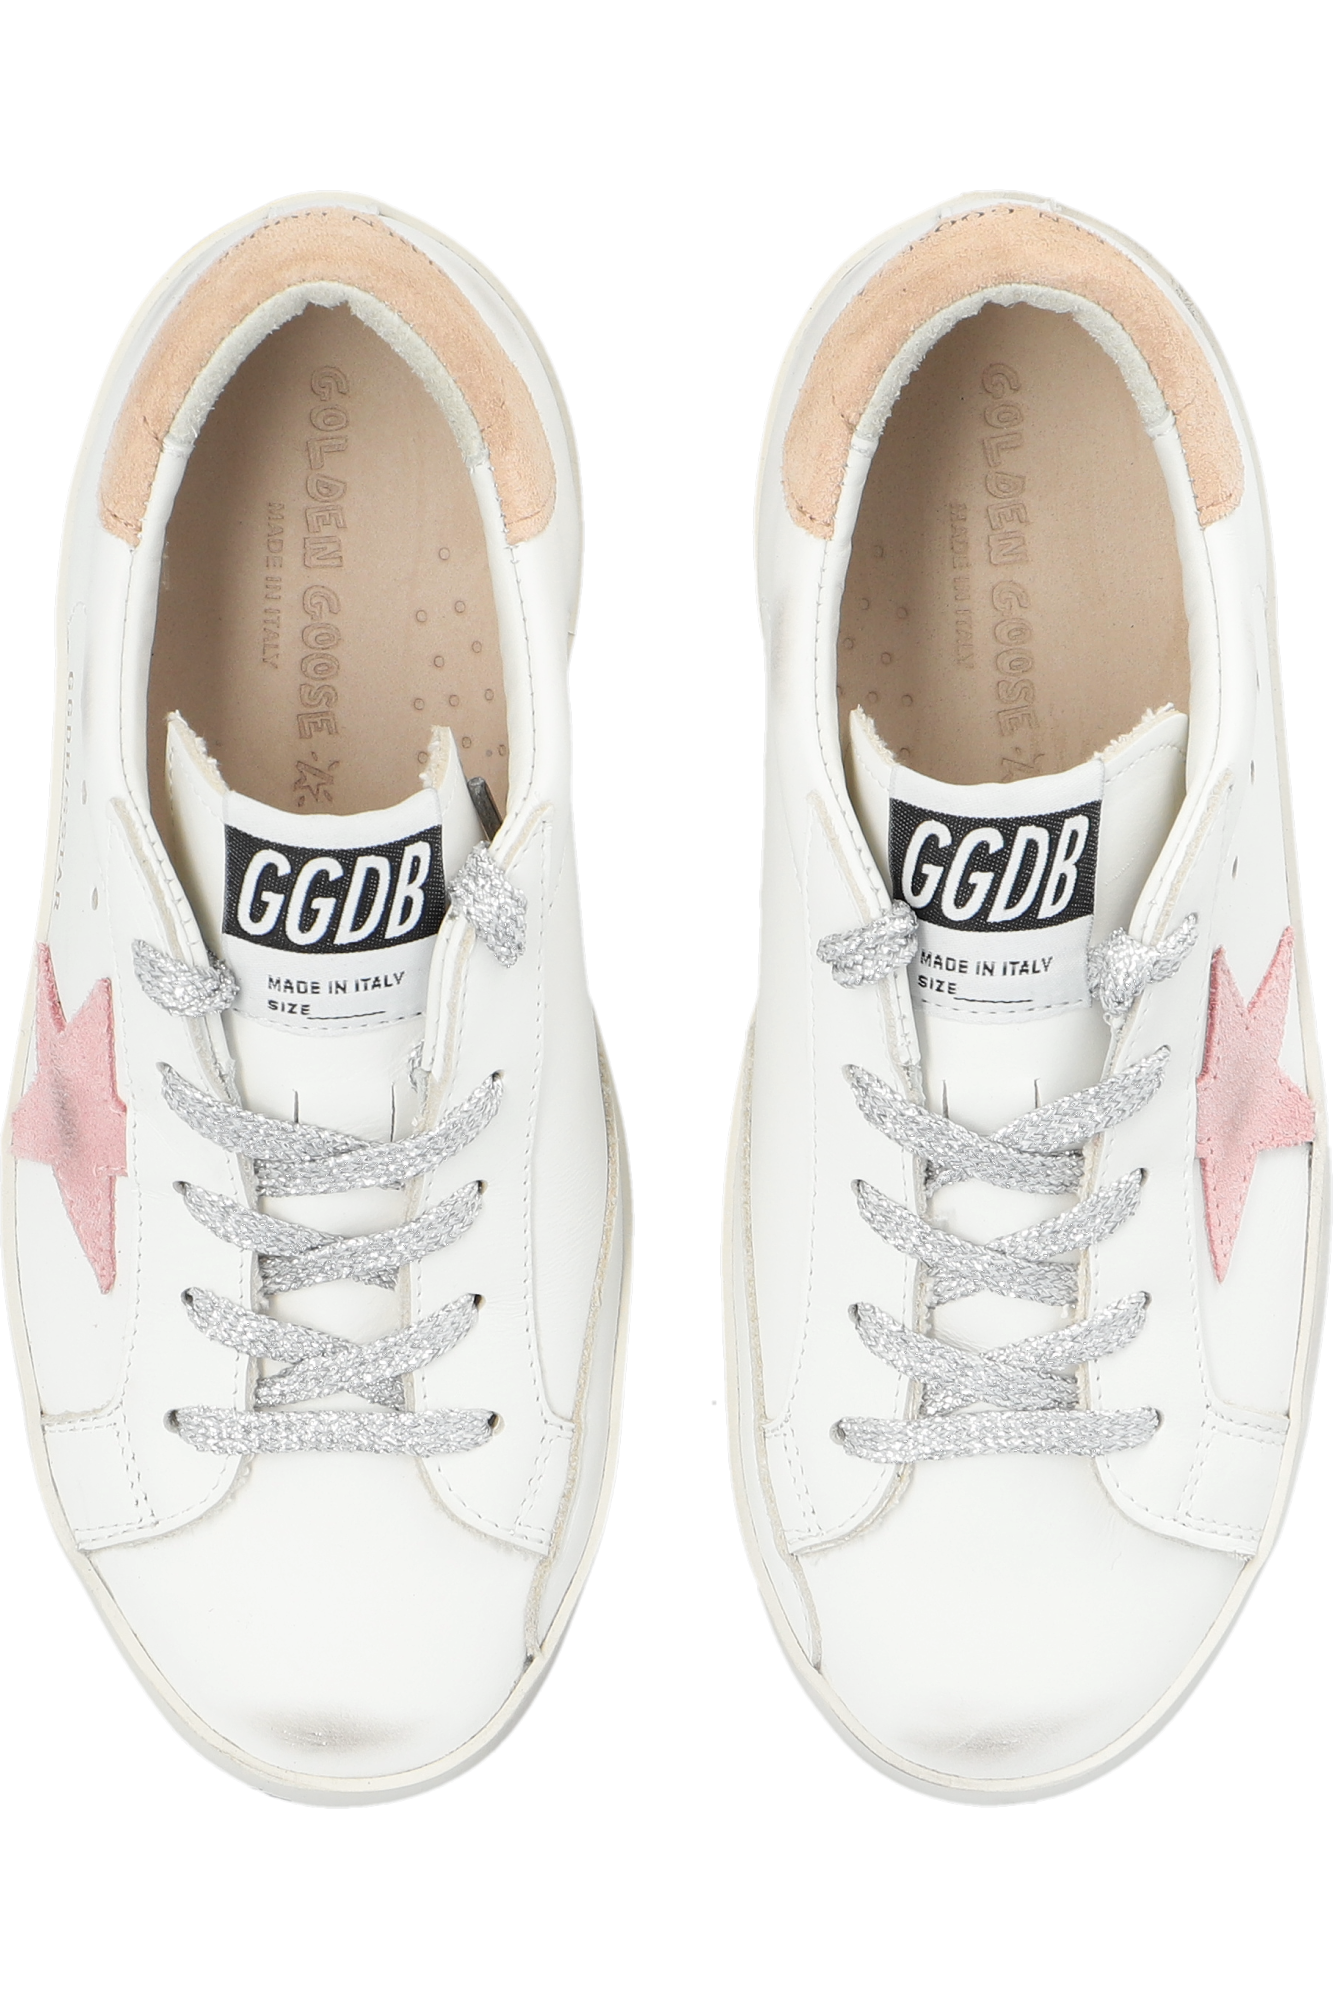 woman stella mccartney sneakers trail sneakers ‘Super-Star Classic With List’ sneakers